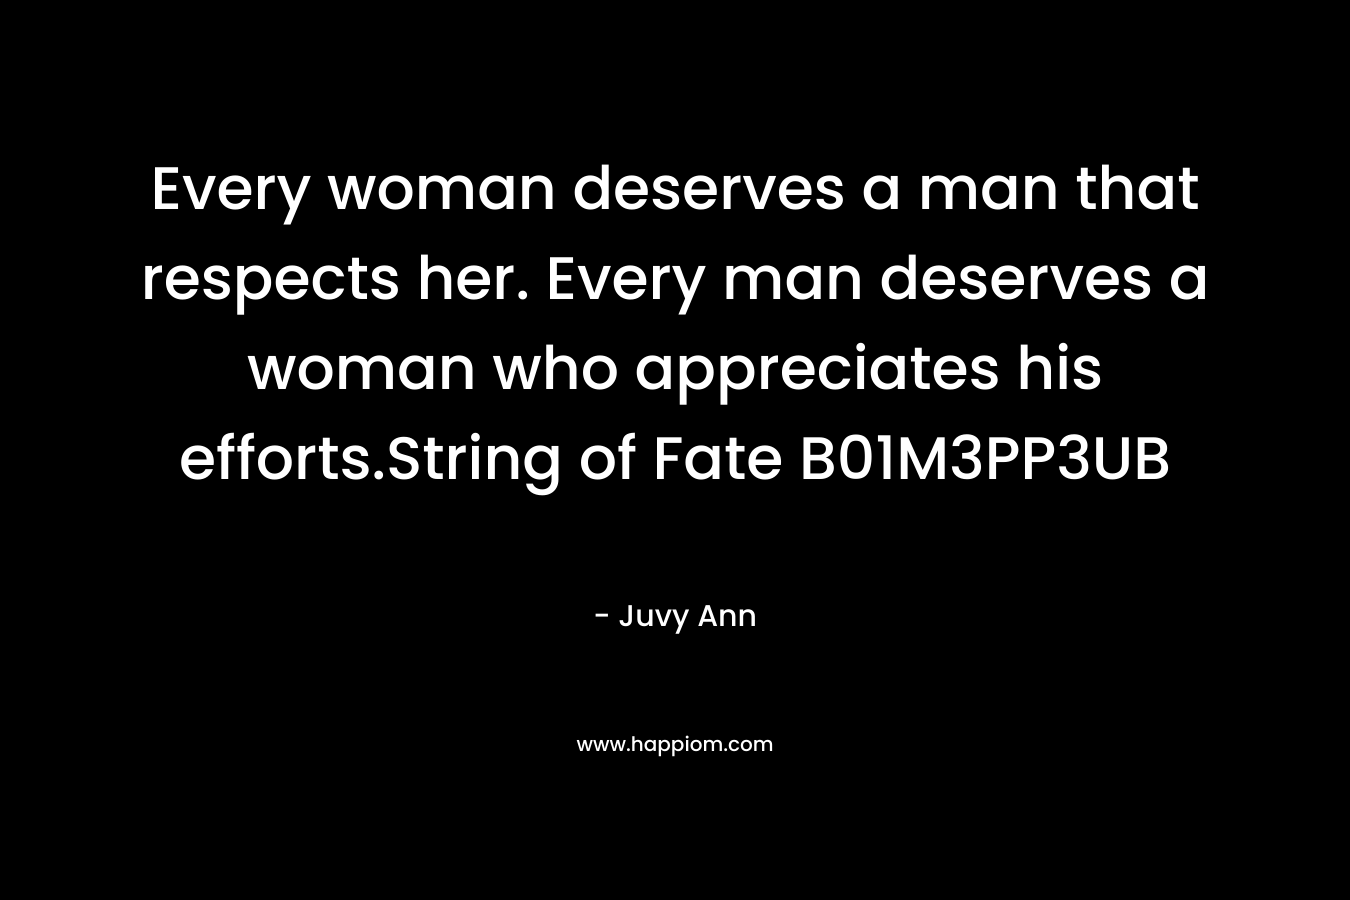 Every woman deserves a man that respects her. Every man deserves a woman who appreciates his efforts.String of Fate B01M3PP3UB